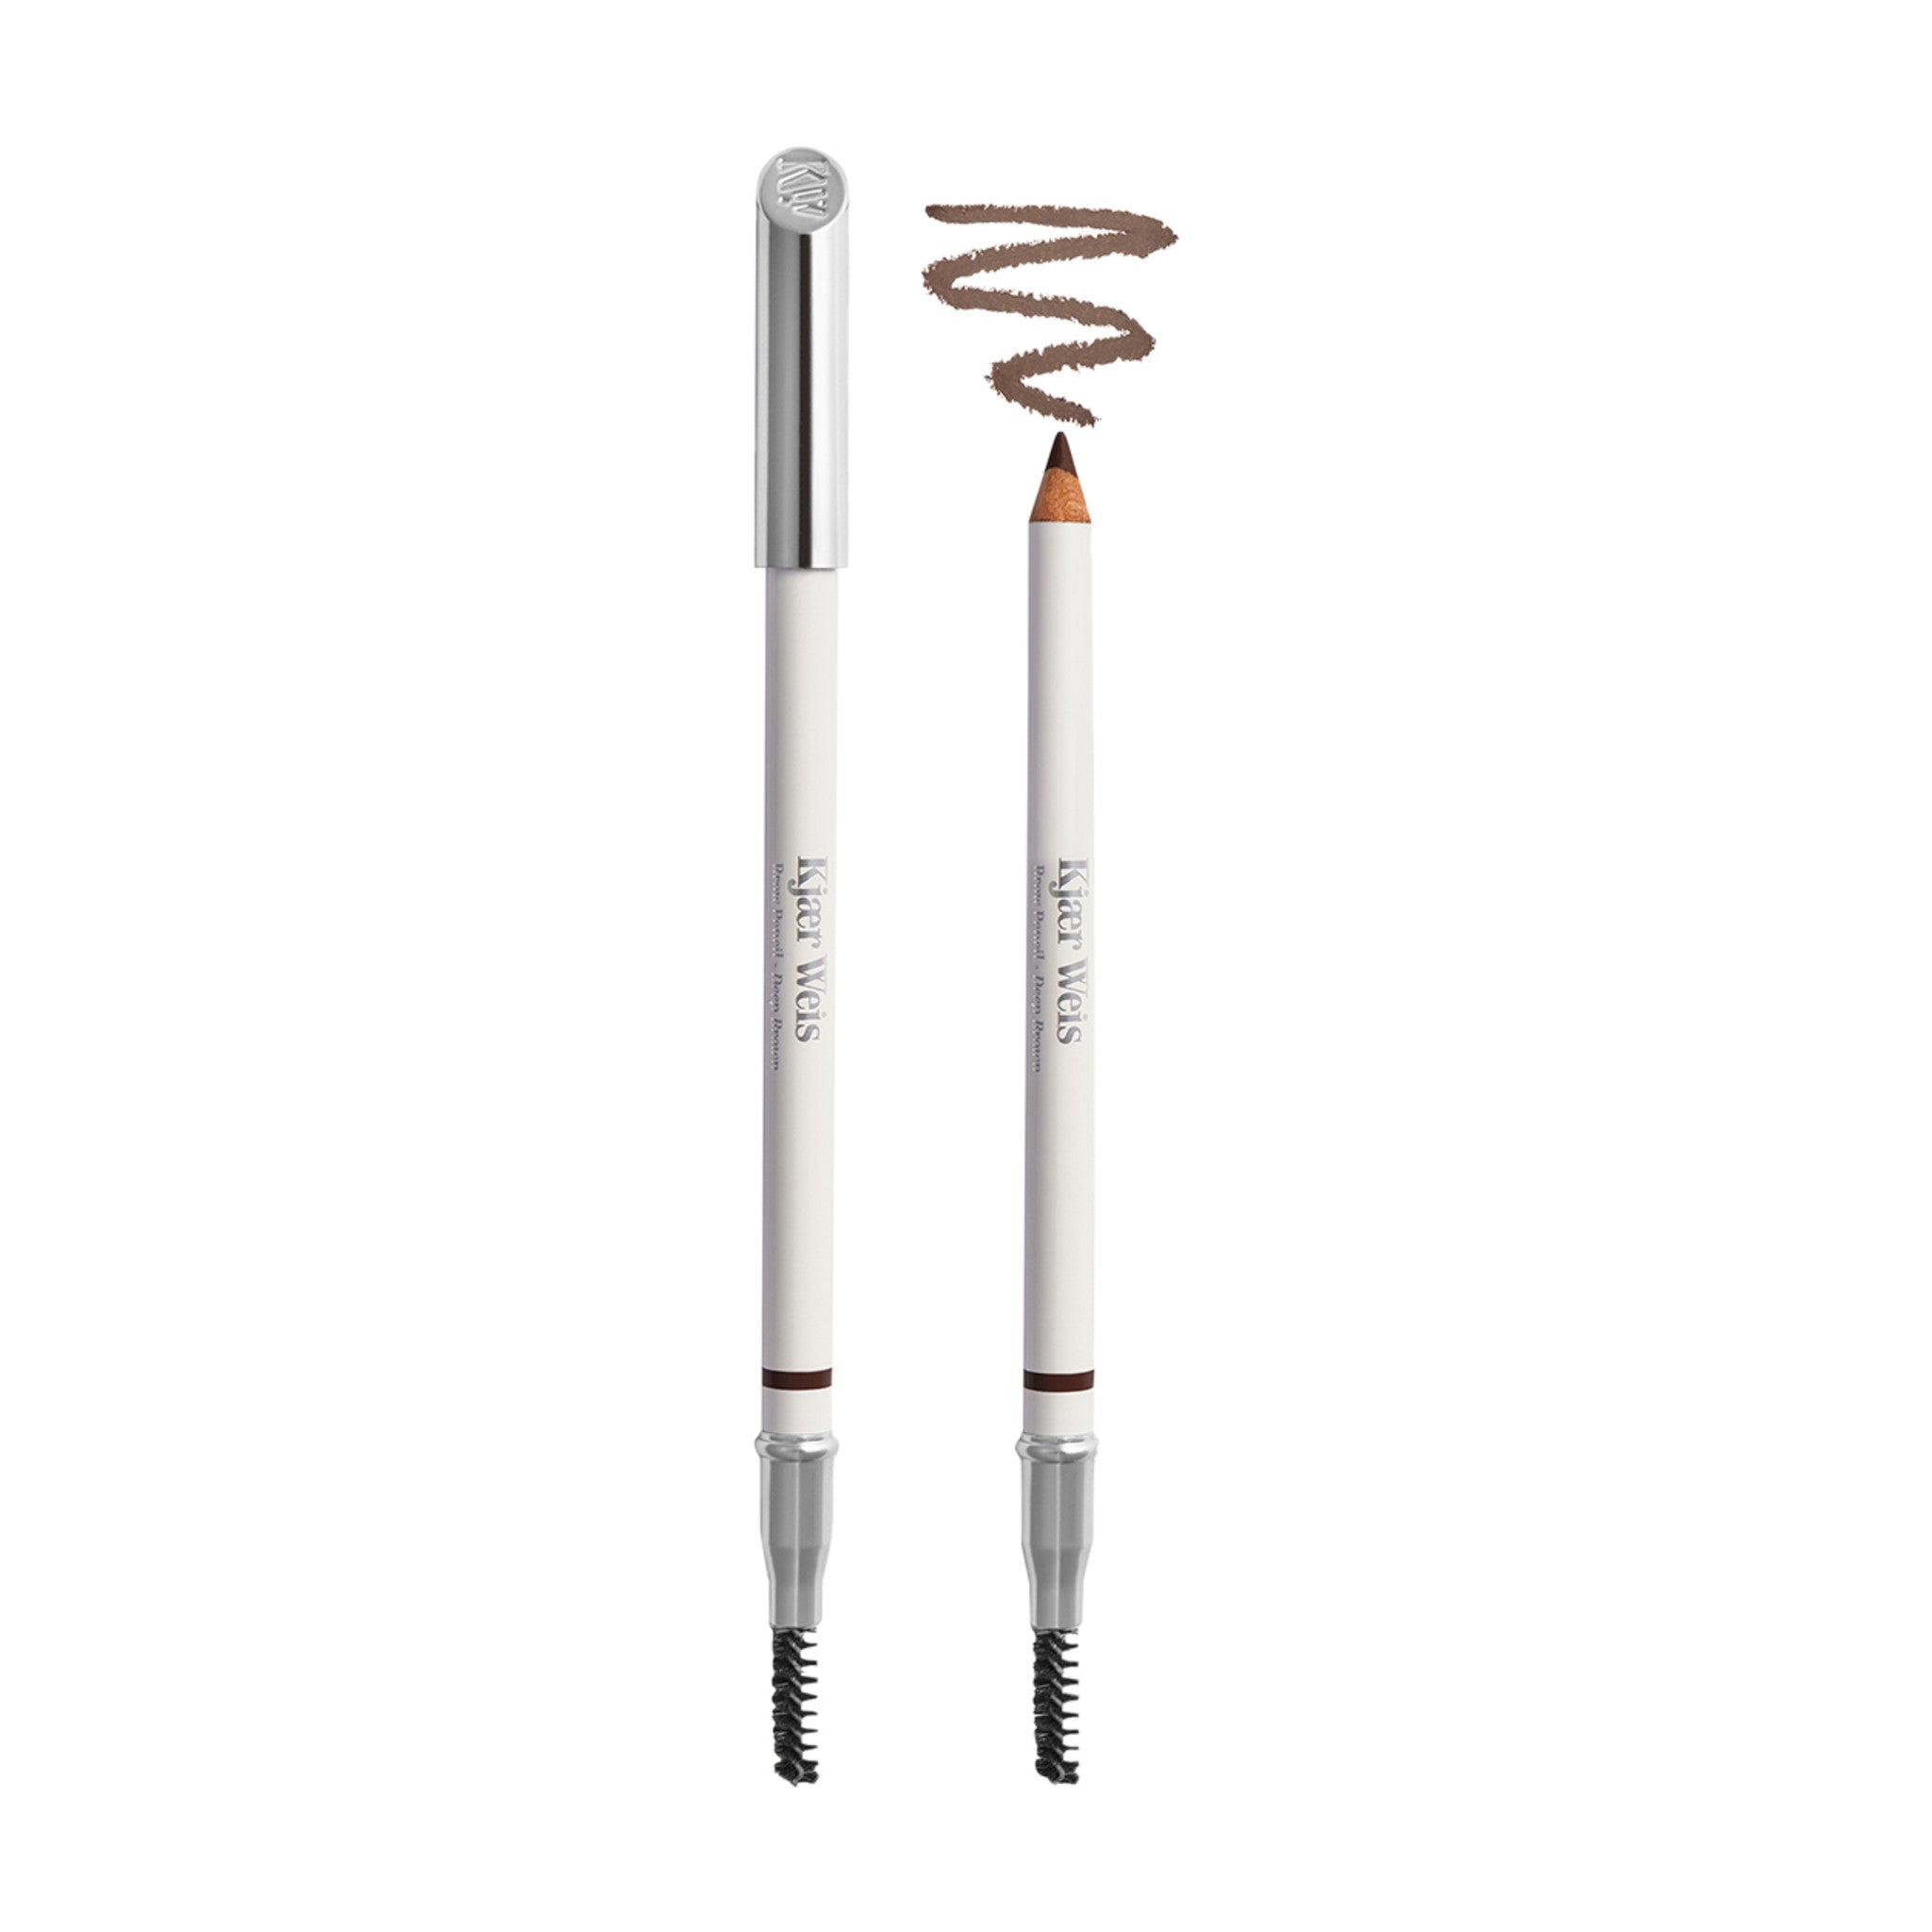 Kjaer Weis Brow Pencil Color/Shade variant: Deep Brown main image. This product is in the color brown